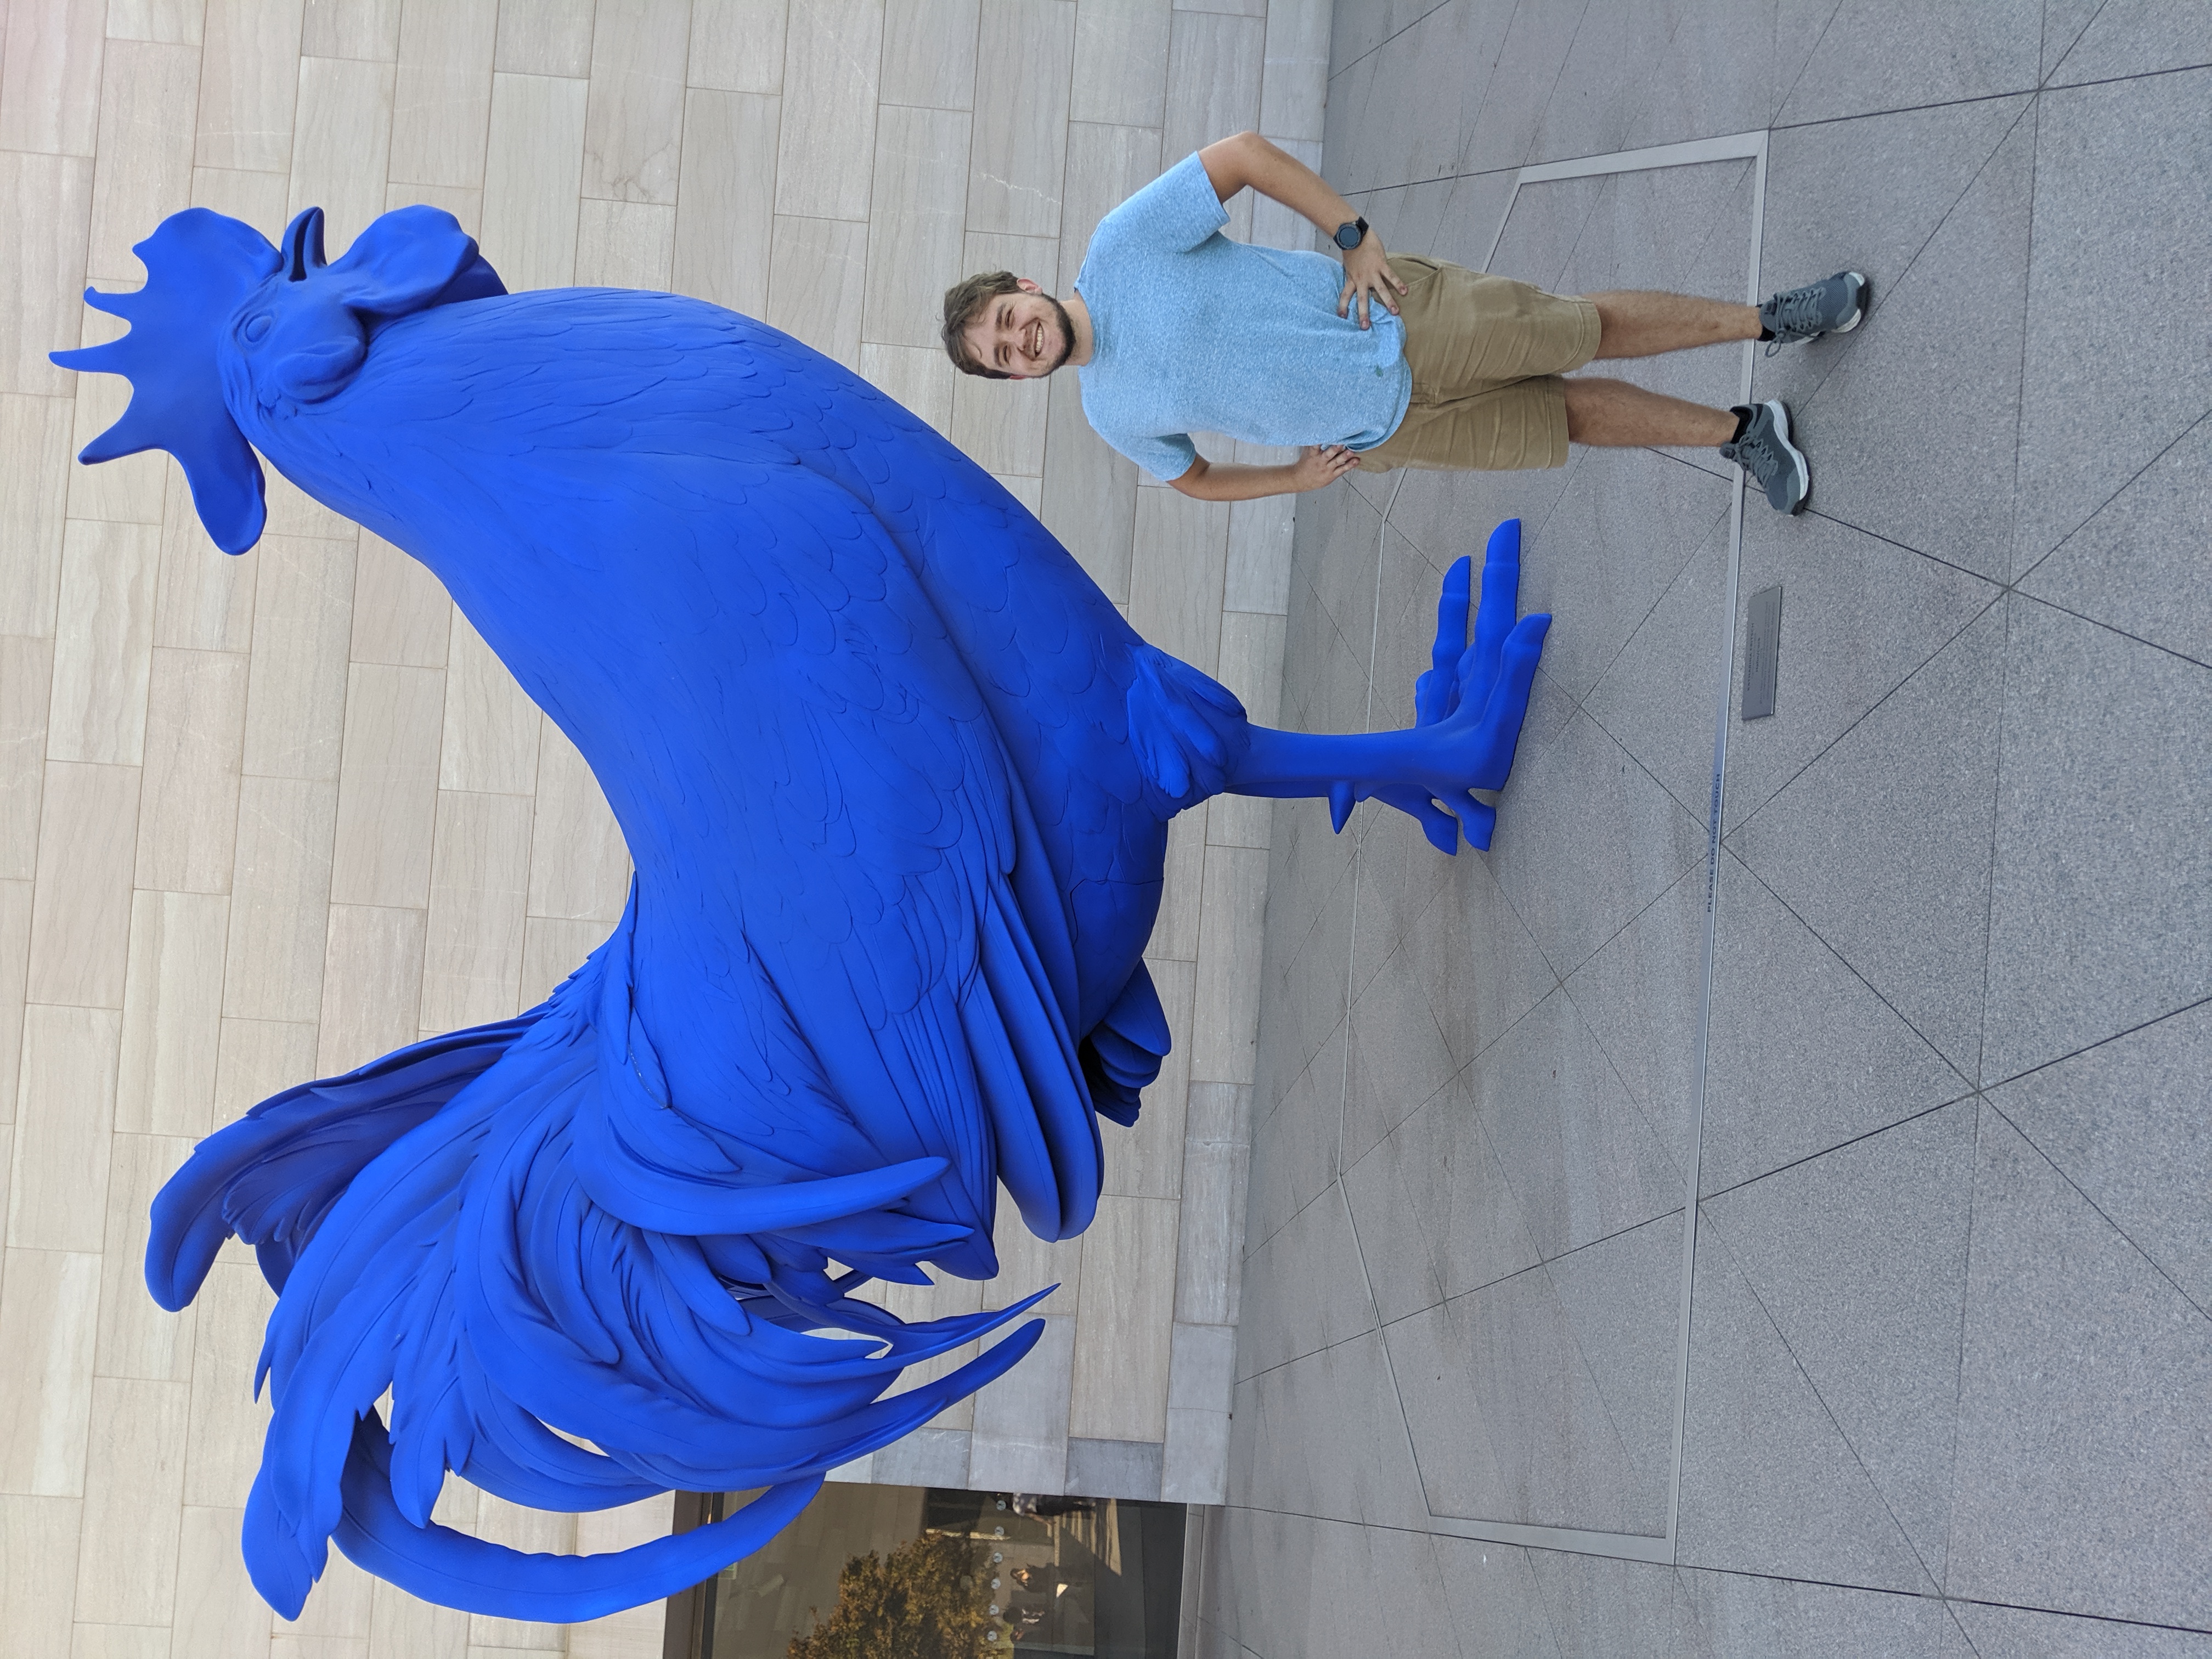 Me (right) with a large blue rooster